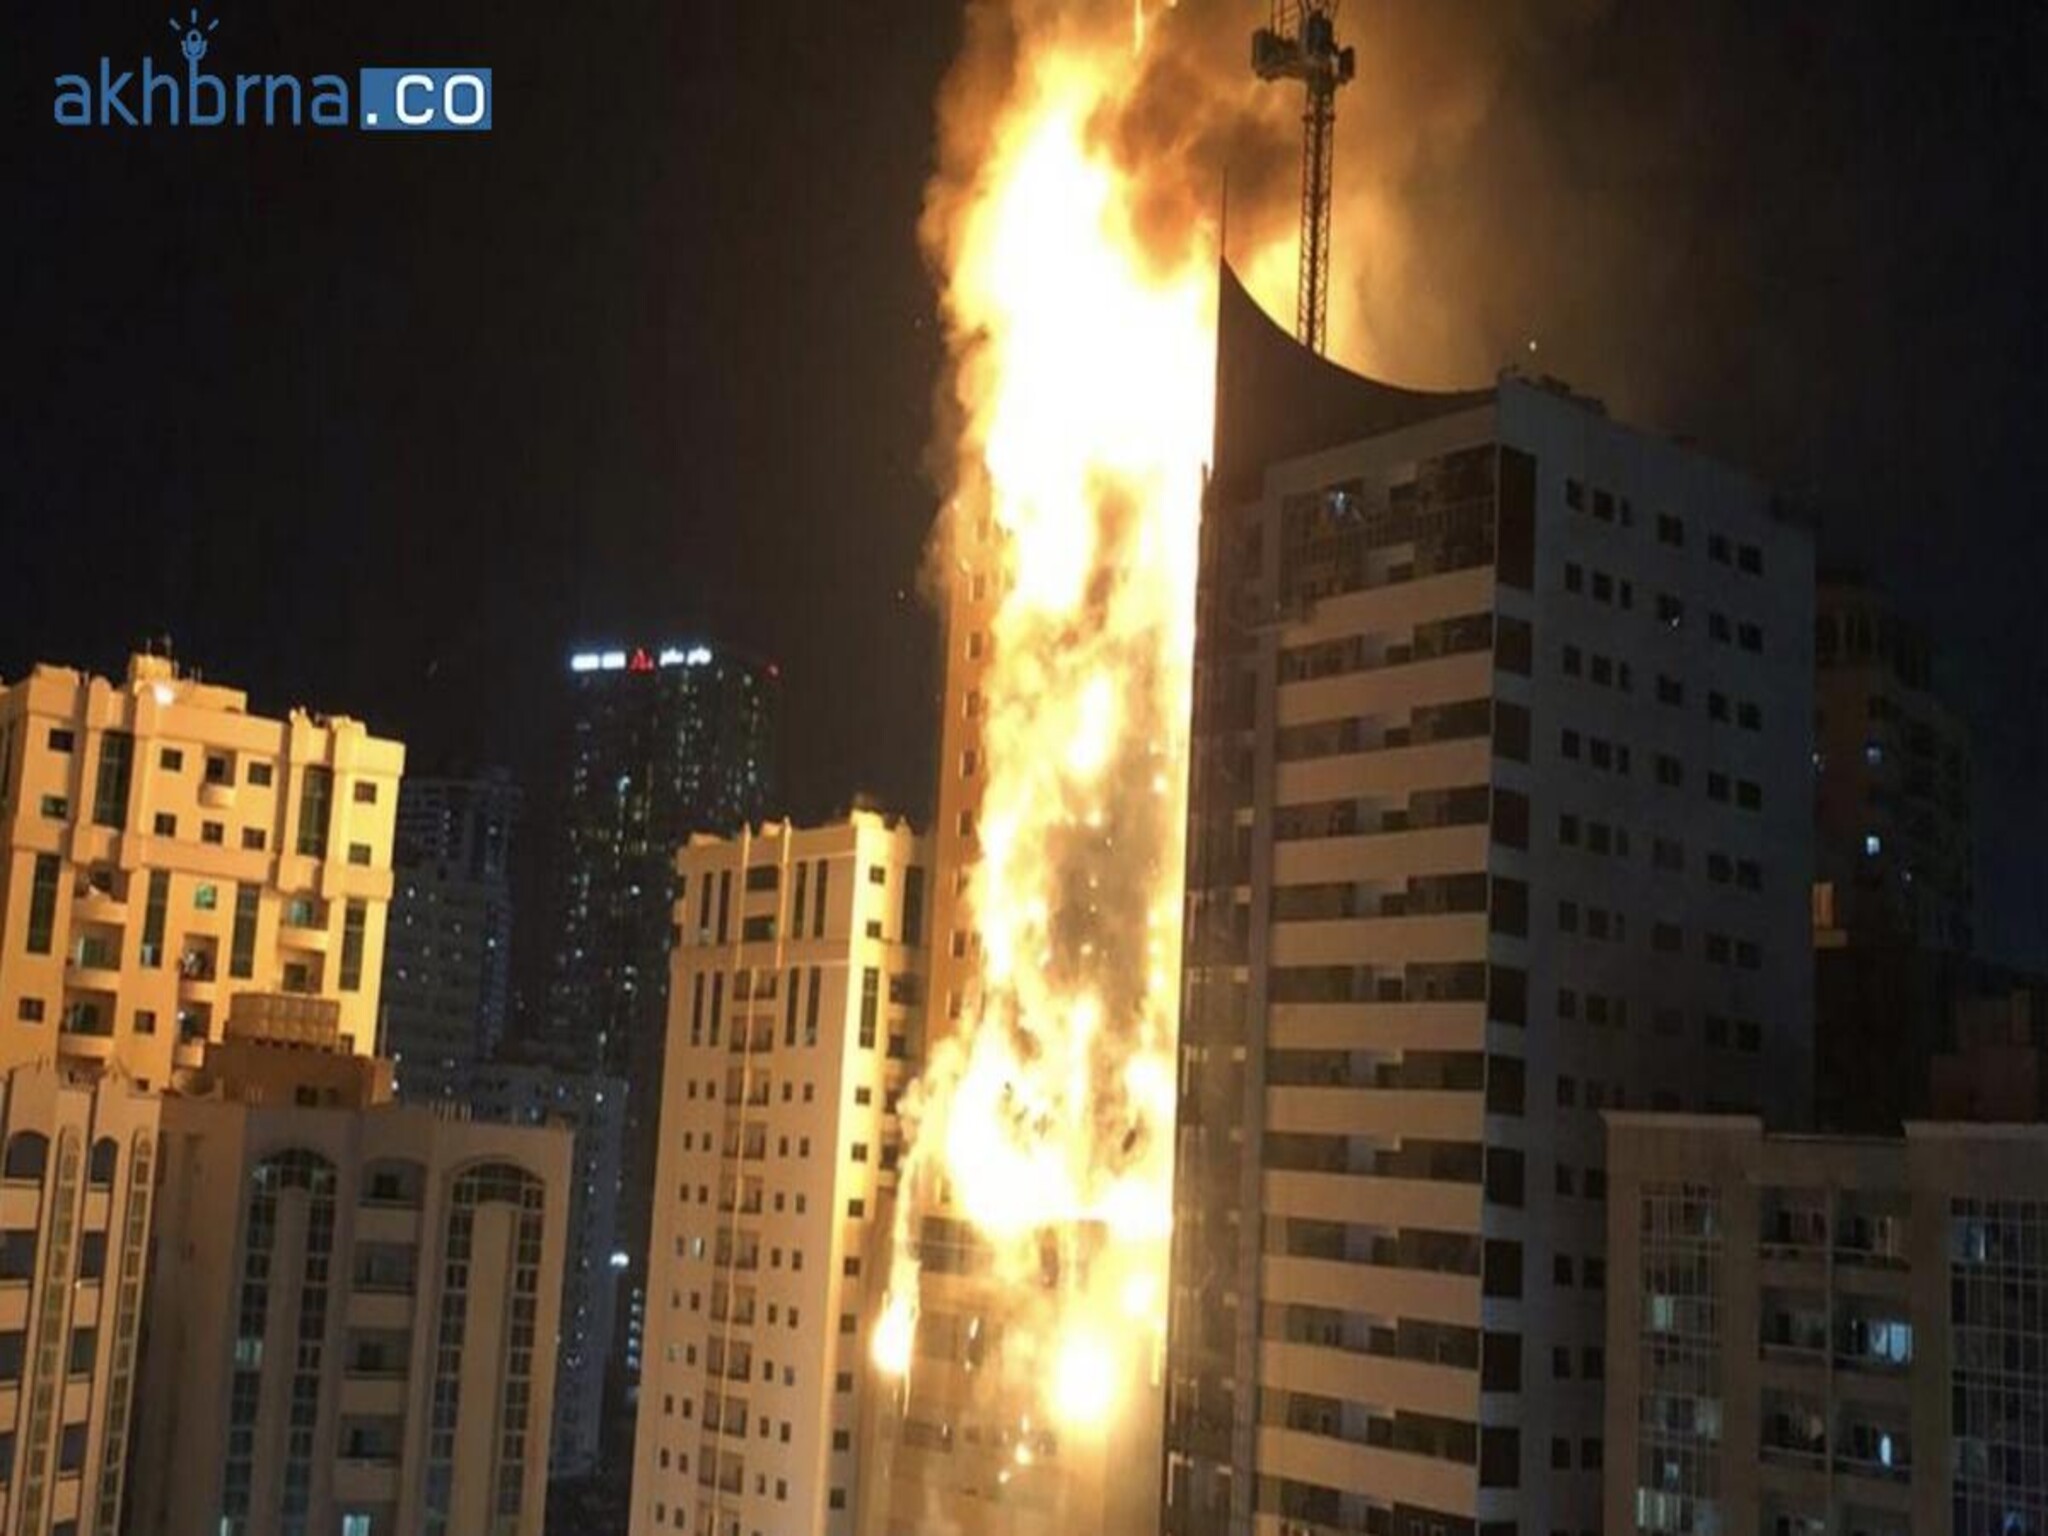 UAE: A massive fire engulfs Sharjah tower, leaving 5 dead and 44 injured